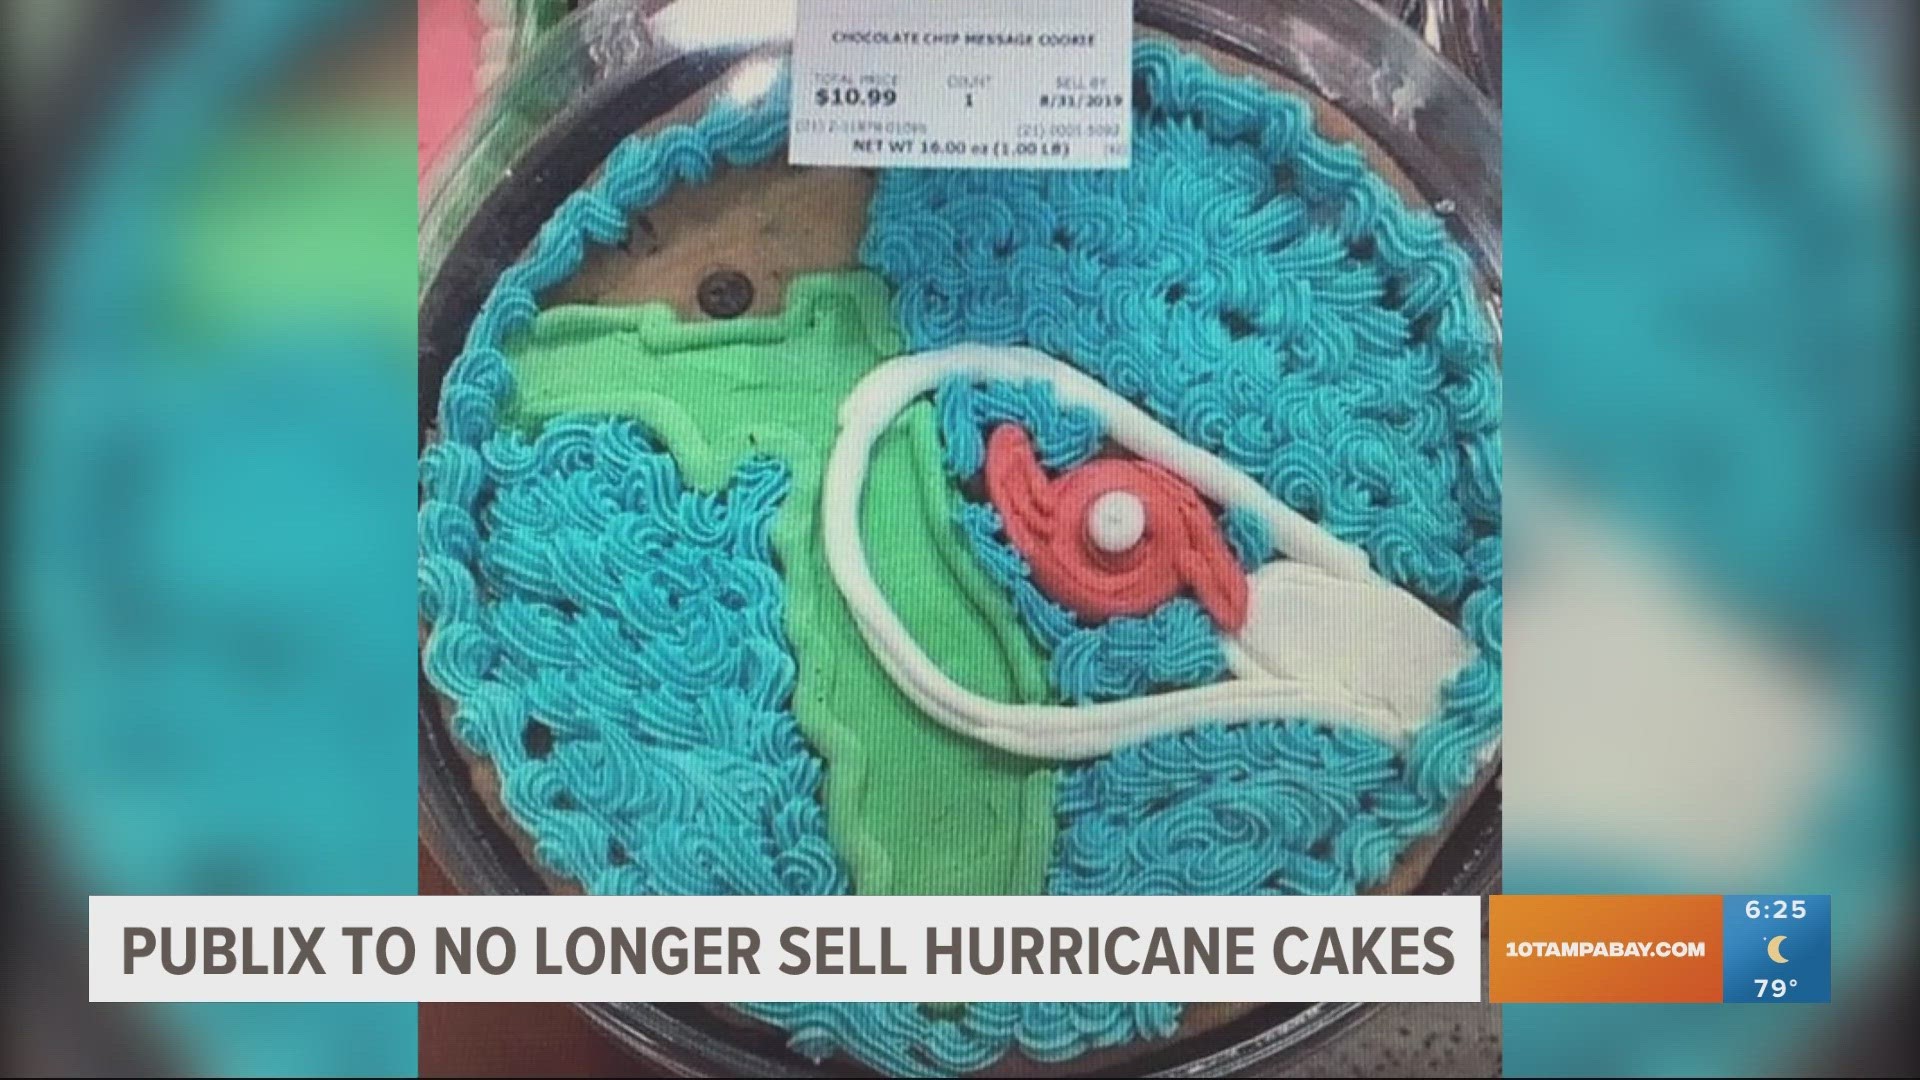 The supermarket chain explained the cakes won't be made anymore to make sure they weren't downplaying the natural disaster.